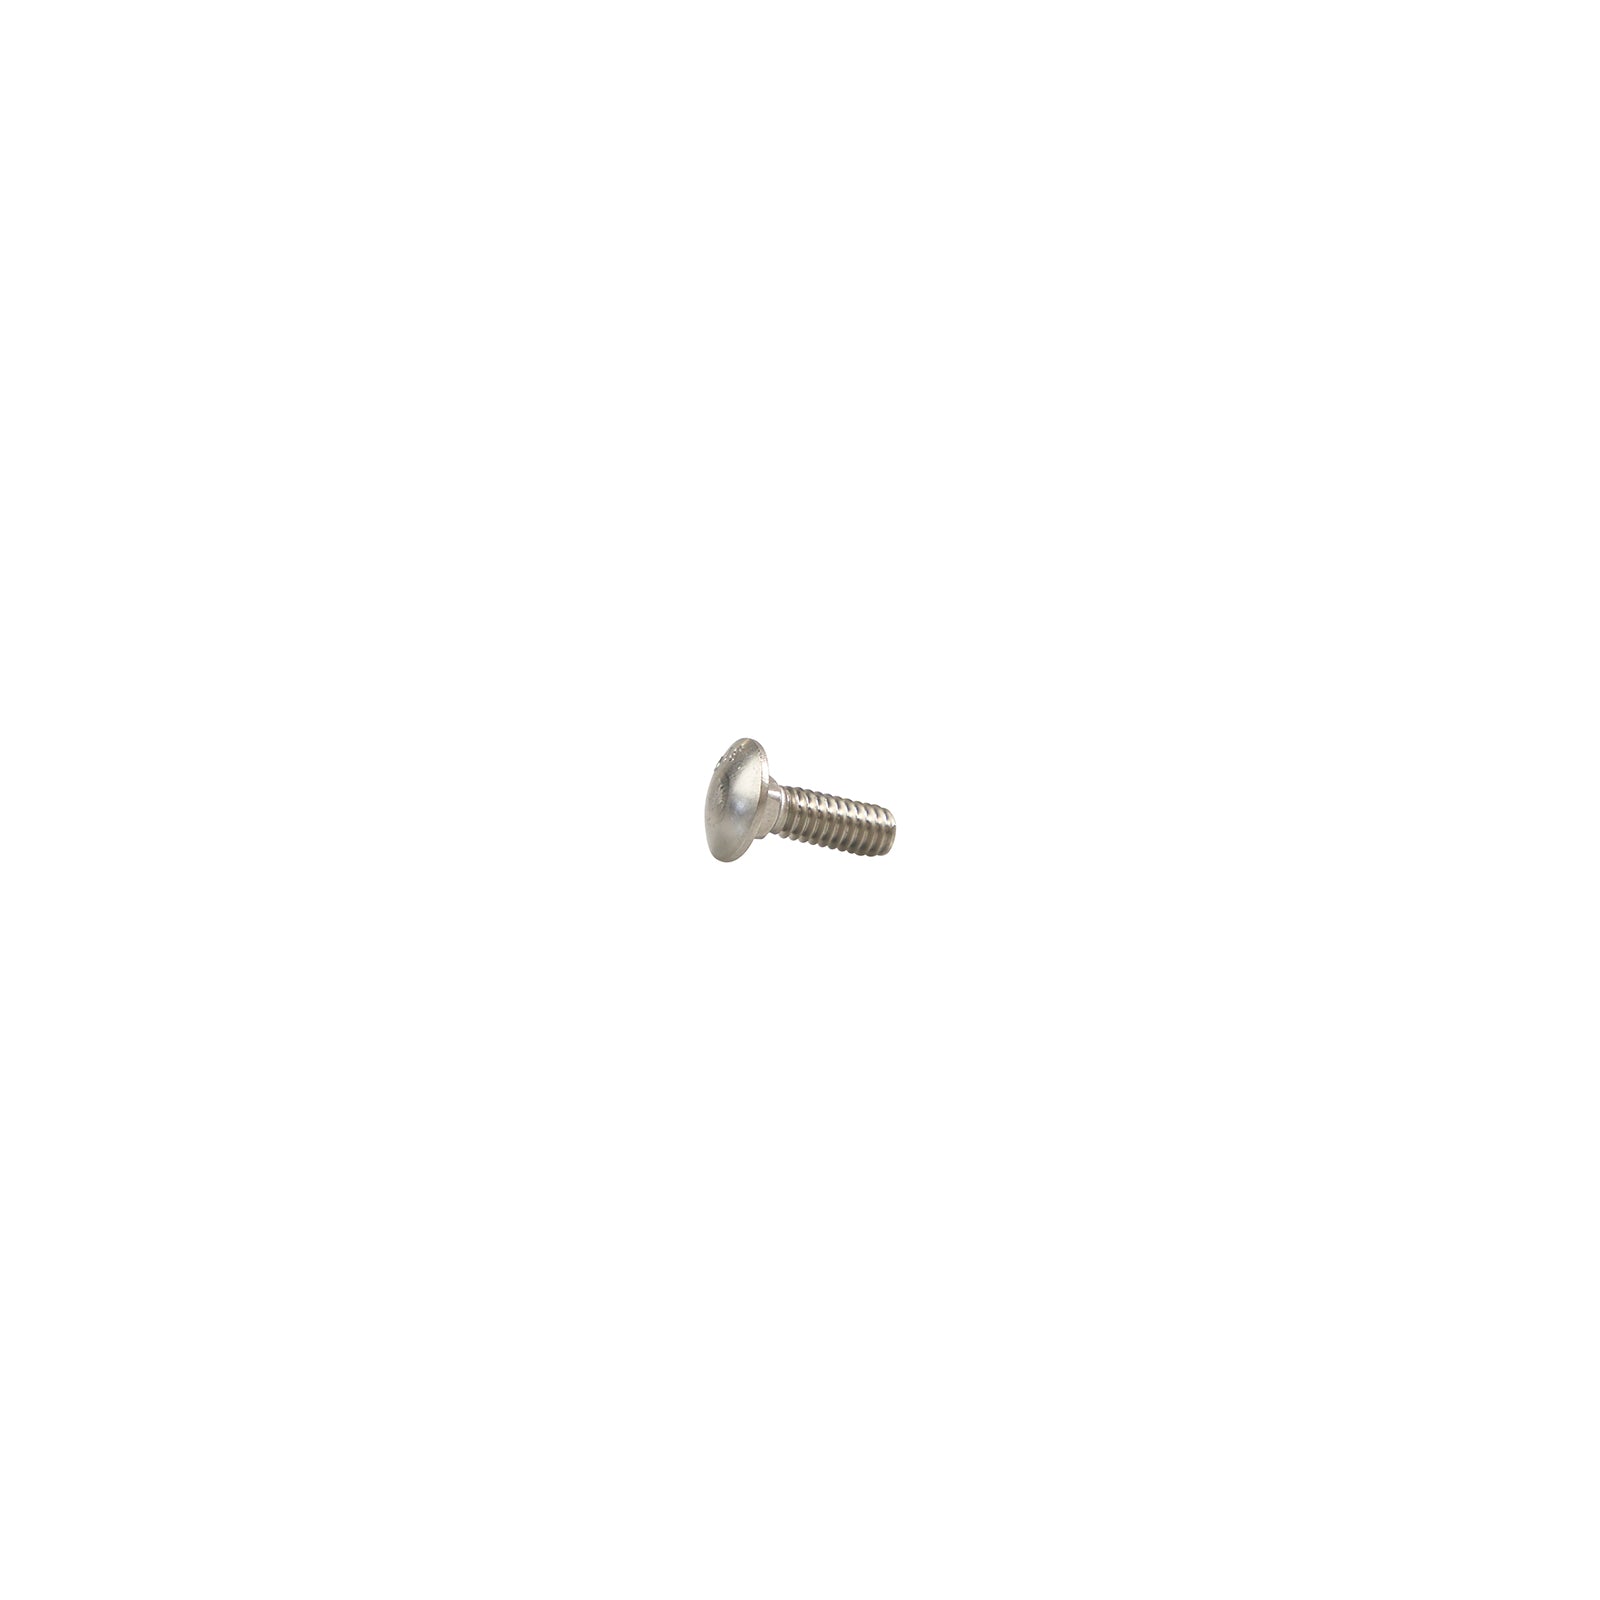 1/4"-20 x 3/4" Conquest Carriage Bolt - 316 Stainless Steel